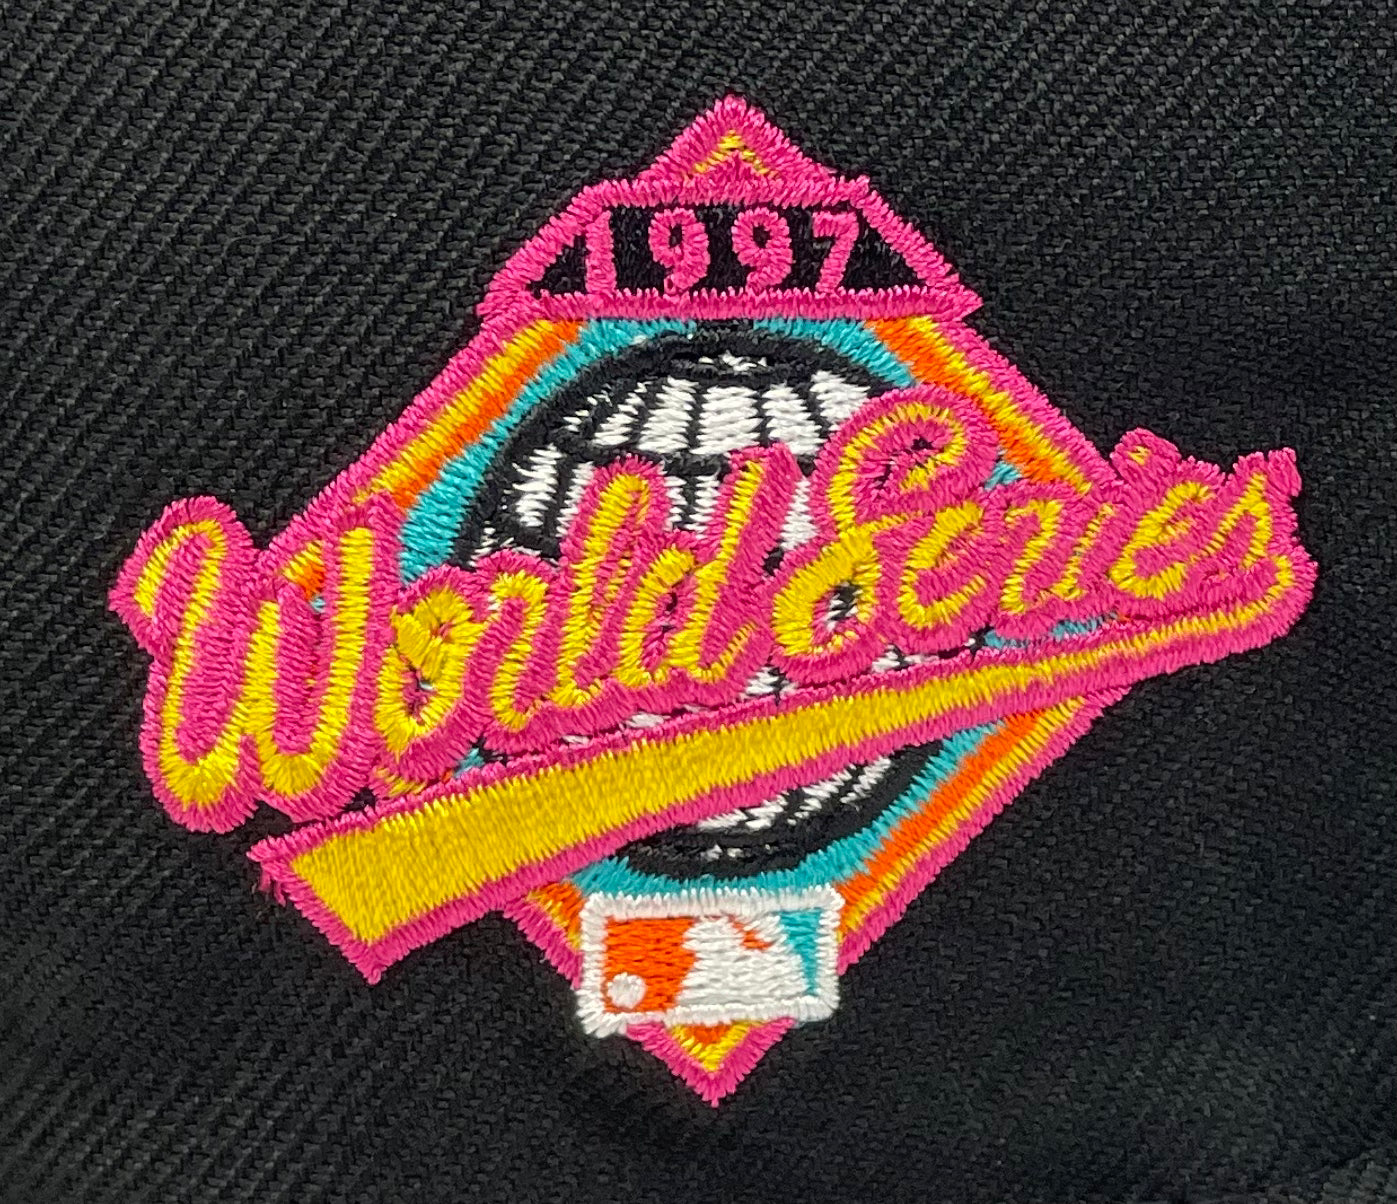 FLORIDA MARLINS (1997 WORLD SERIES) NEW ERA 59FIFTY FITTED (GREEN UNDER VISOR)